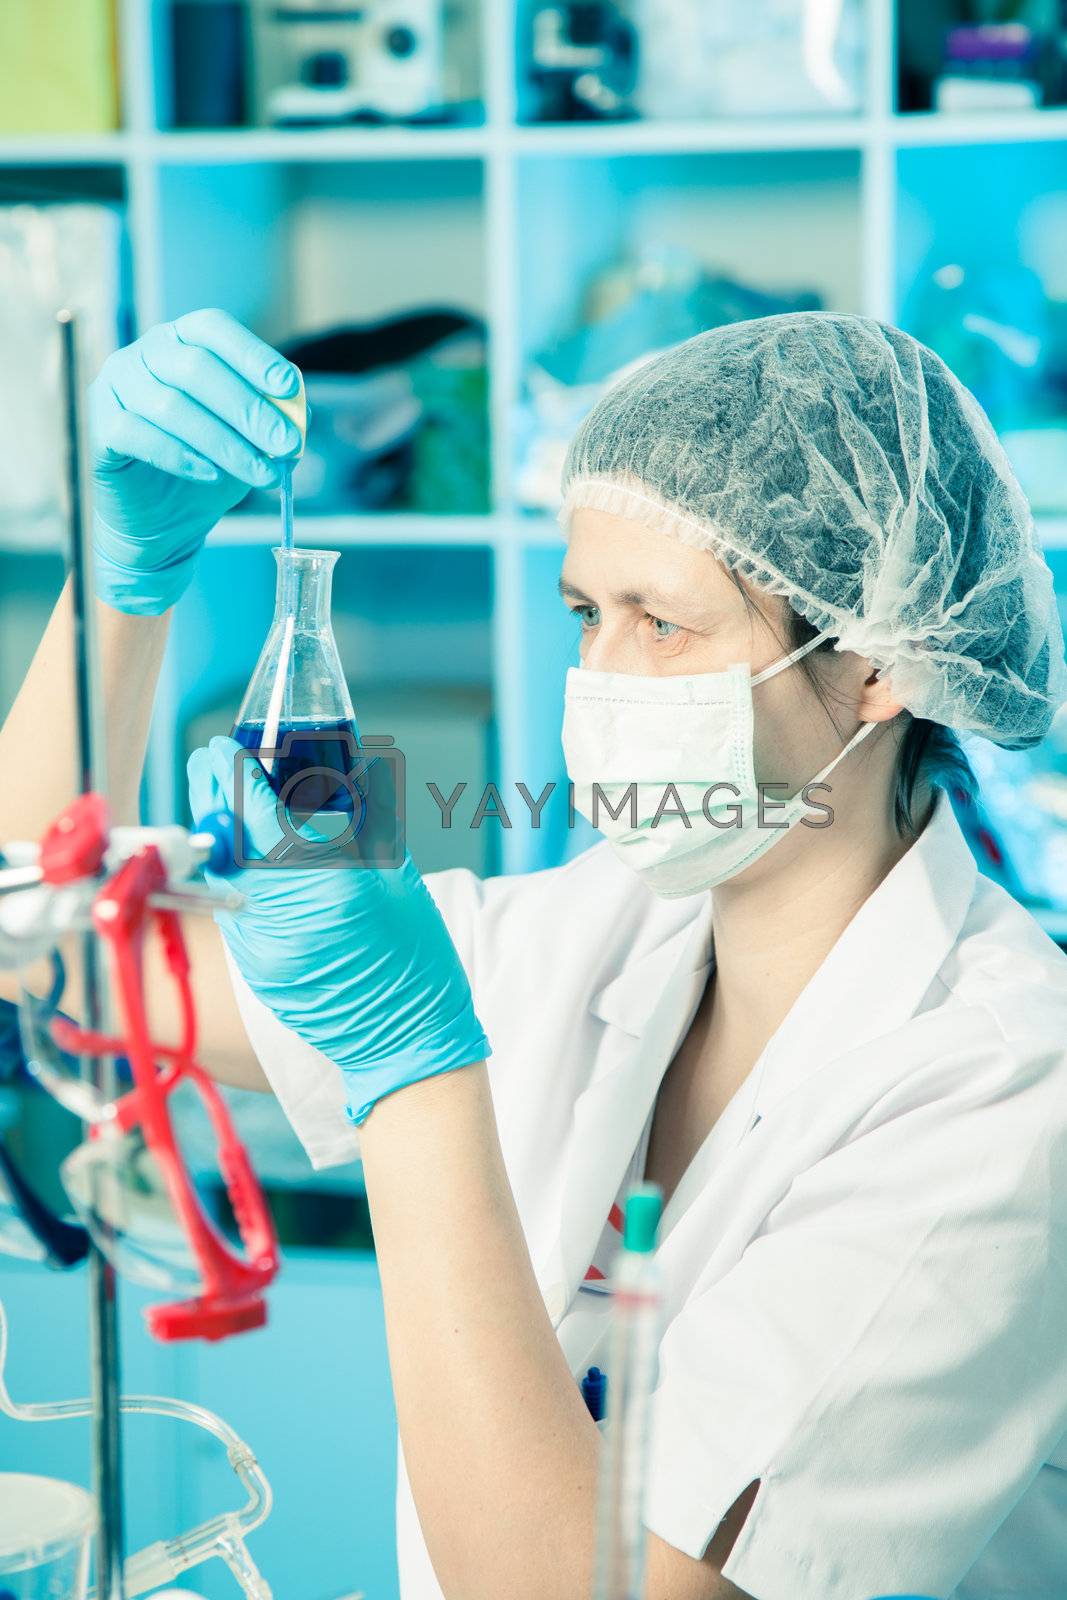 Royalty free image of Scientific researcher holding at a liquid solution in a lab by motorolka